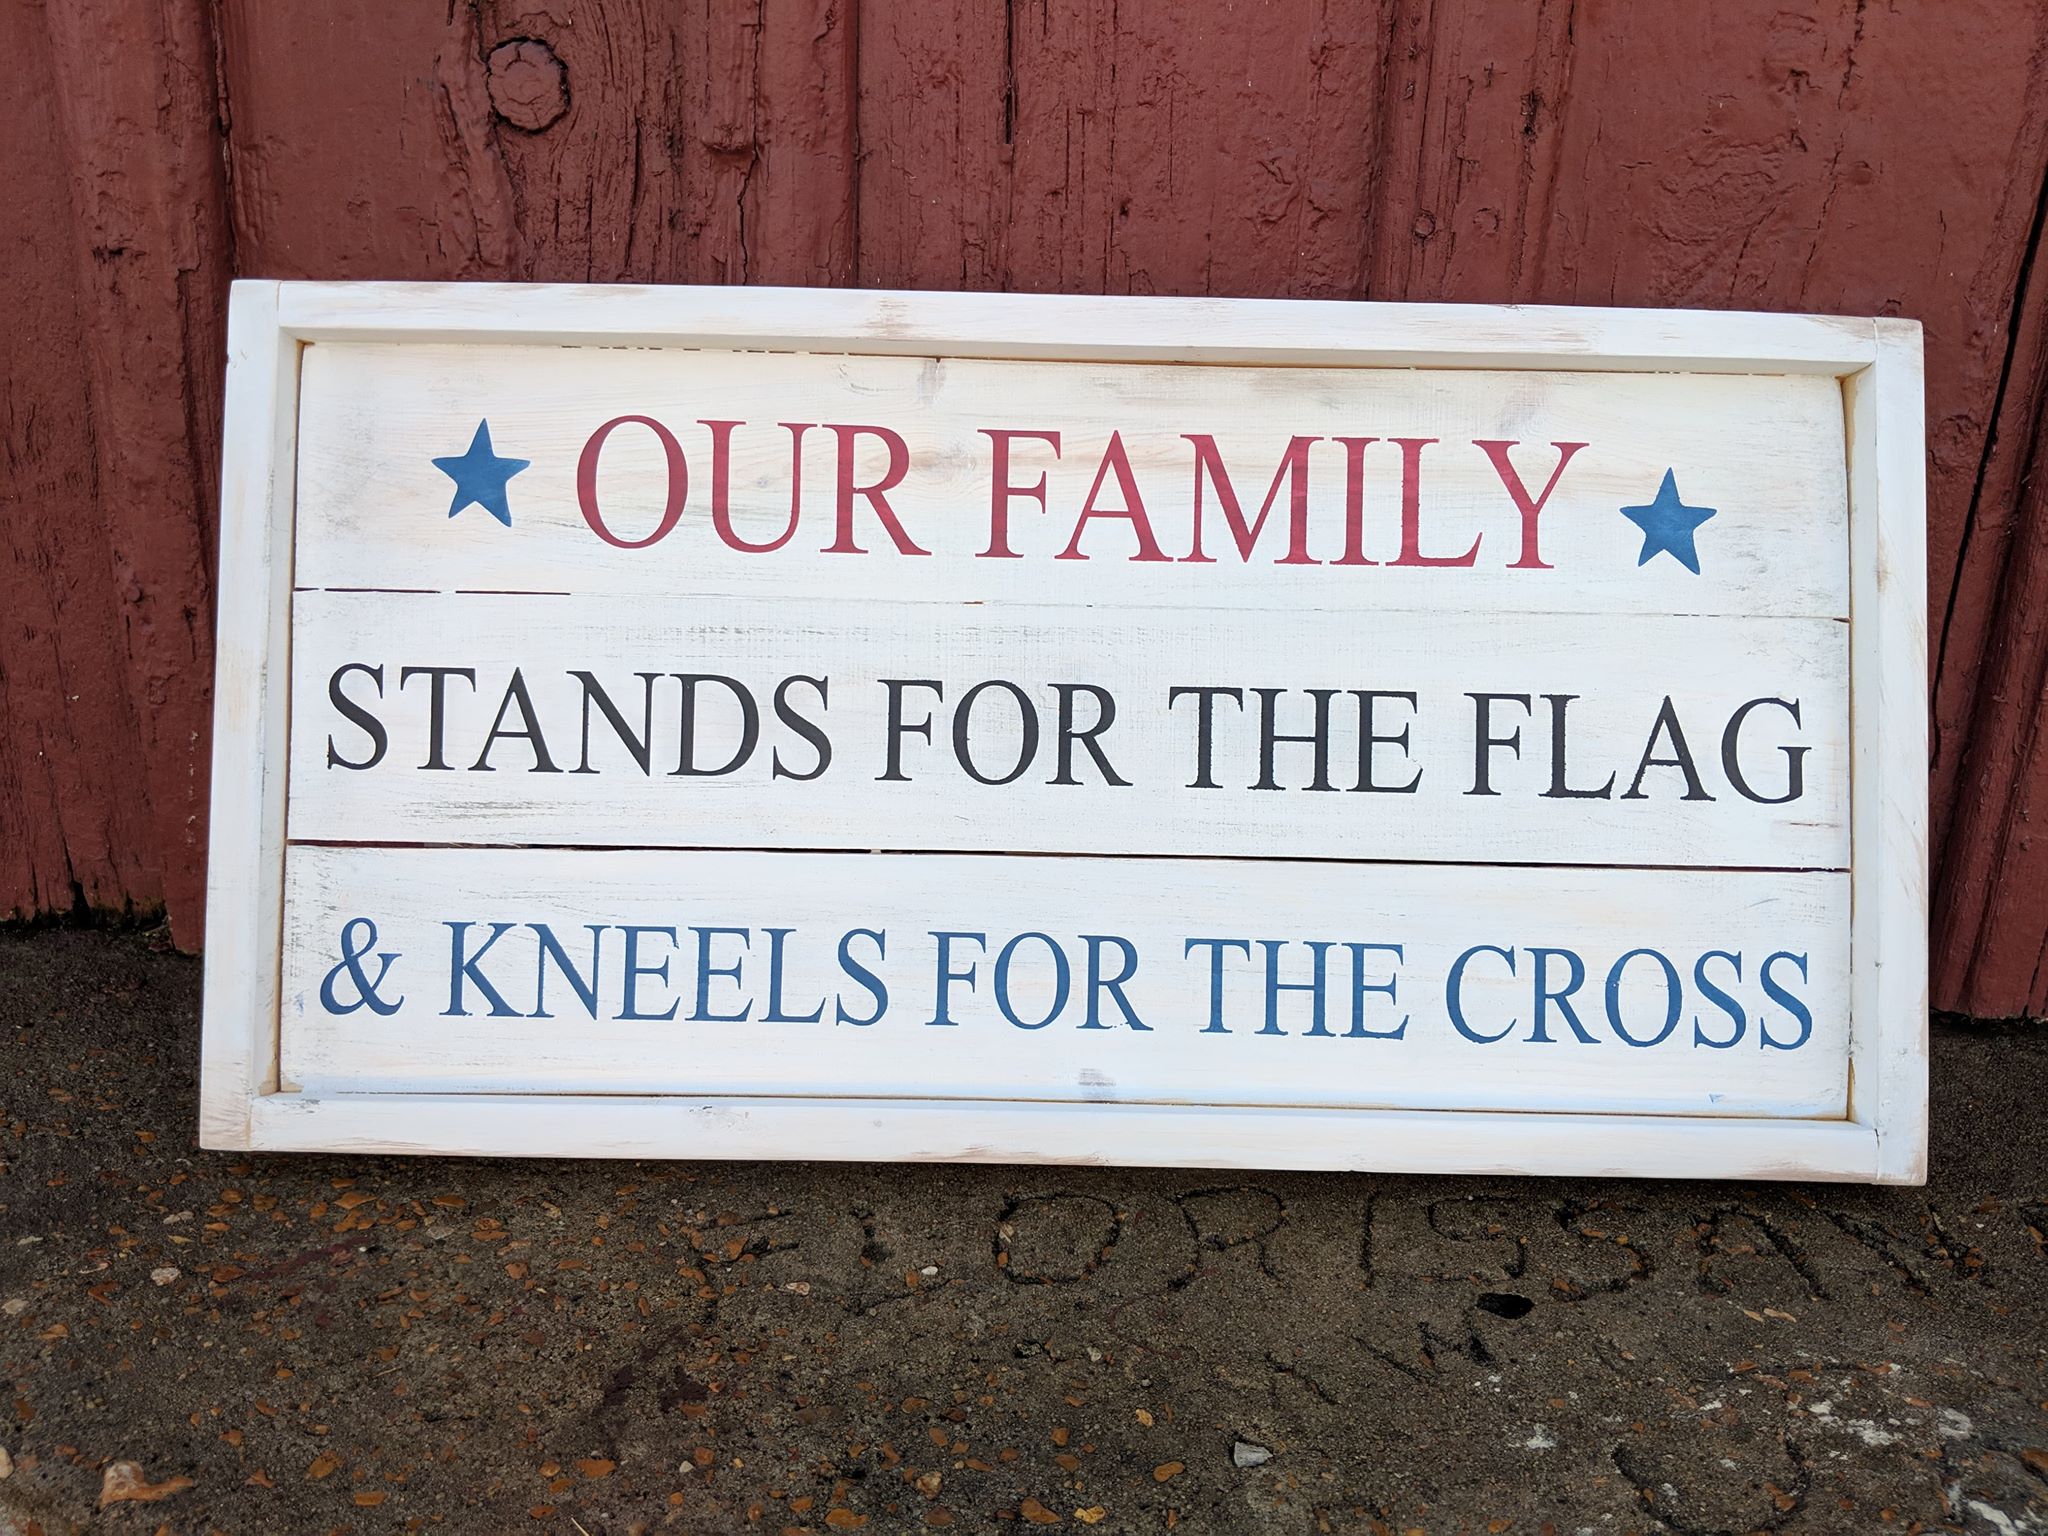 Our family stands for the flag and kneels for the cross